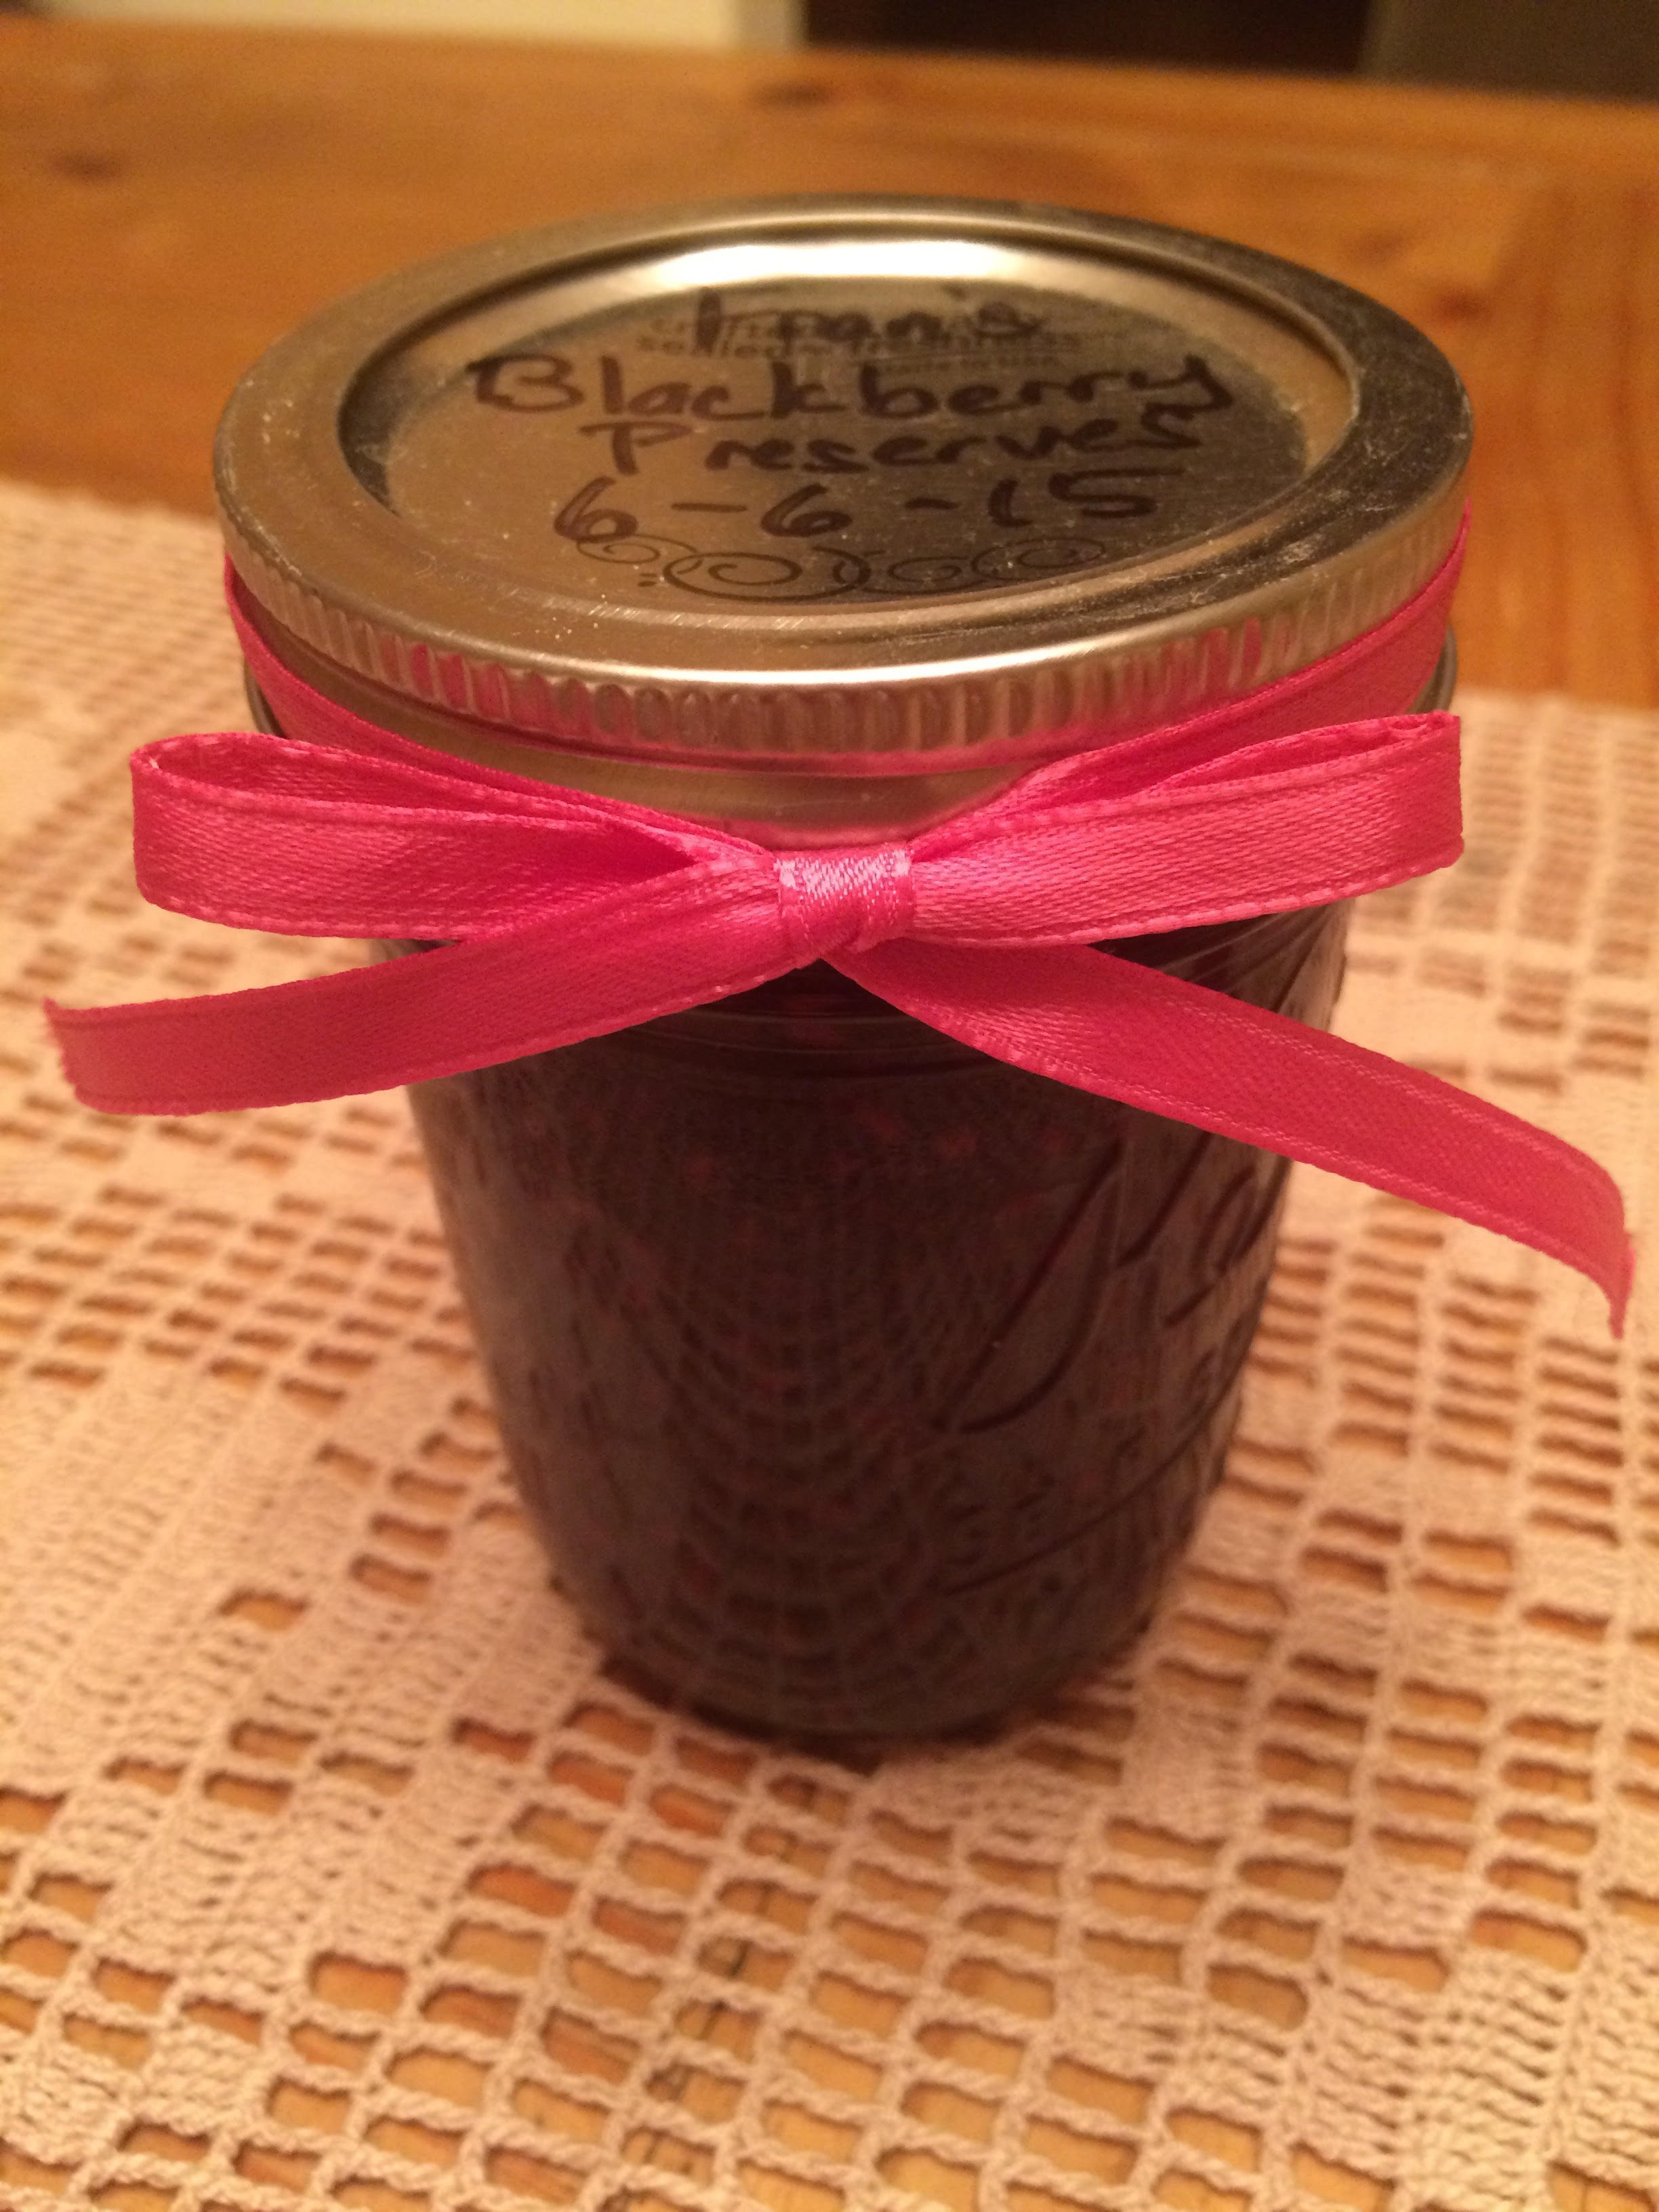 Fran's Blackberry Jam -- too cute to be scary.